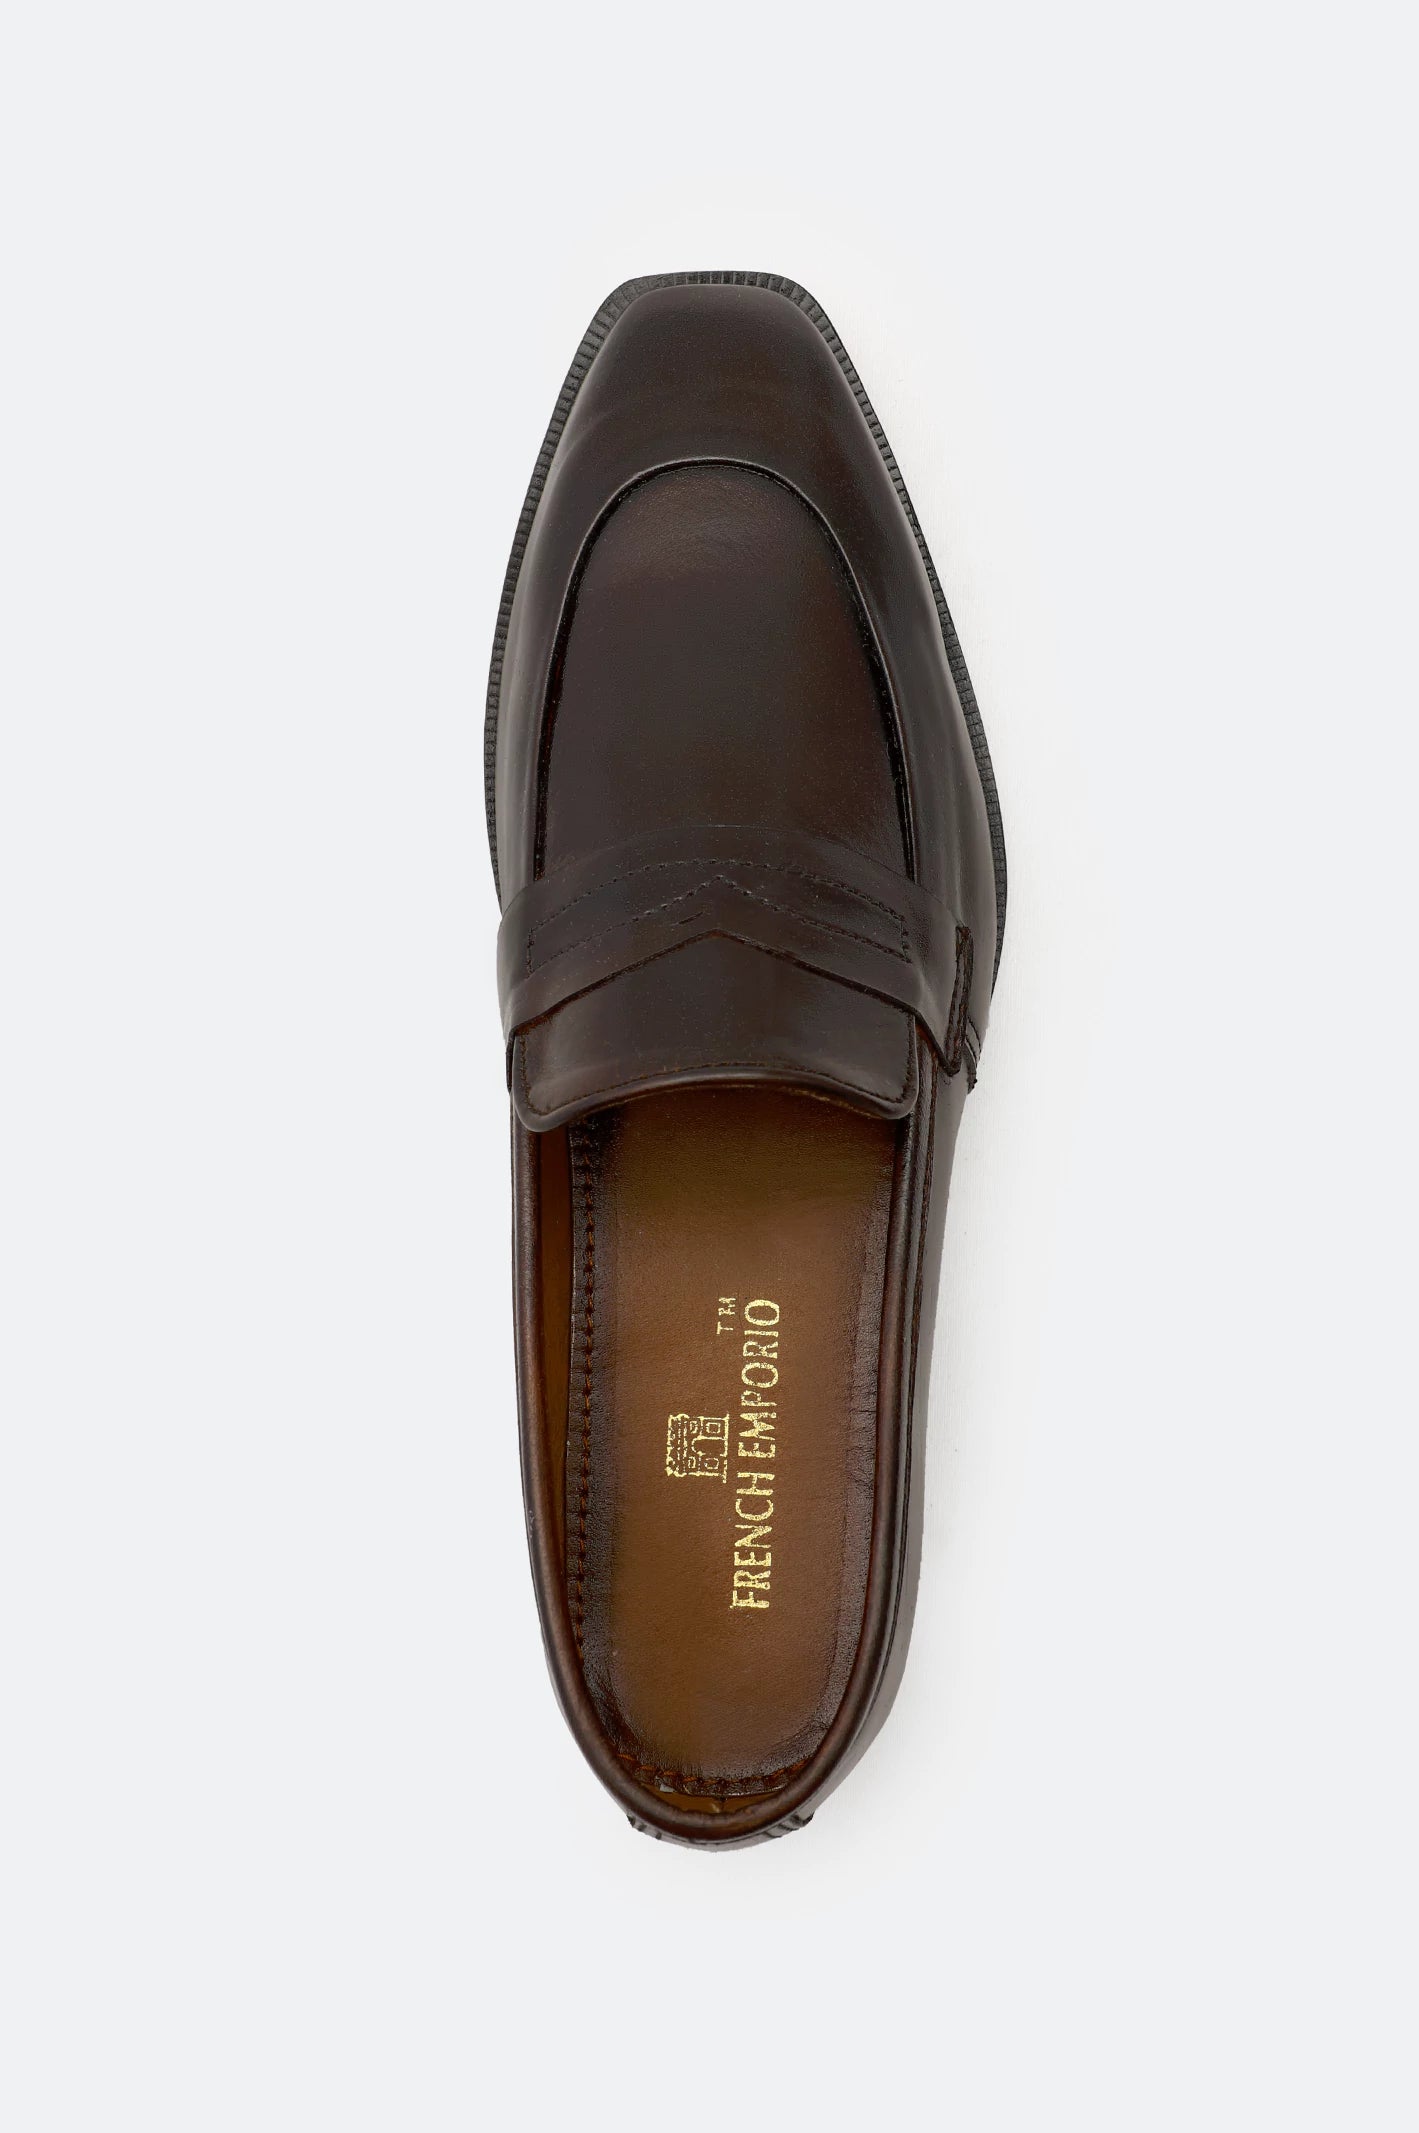 Brown Formal Shoes From Diners